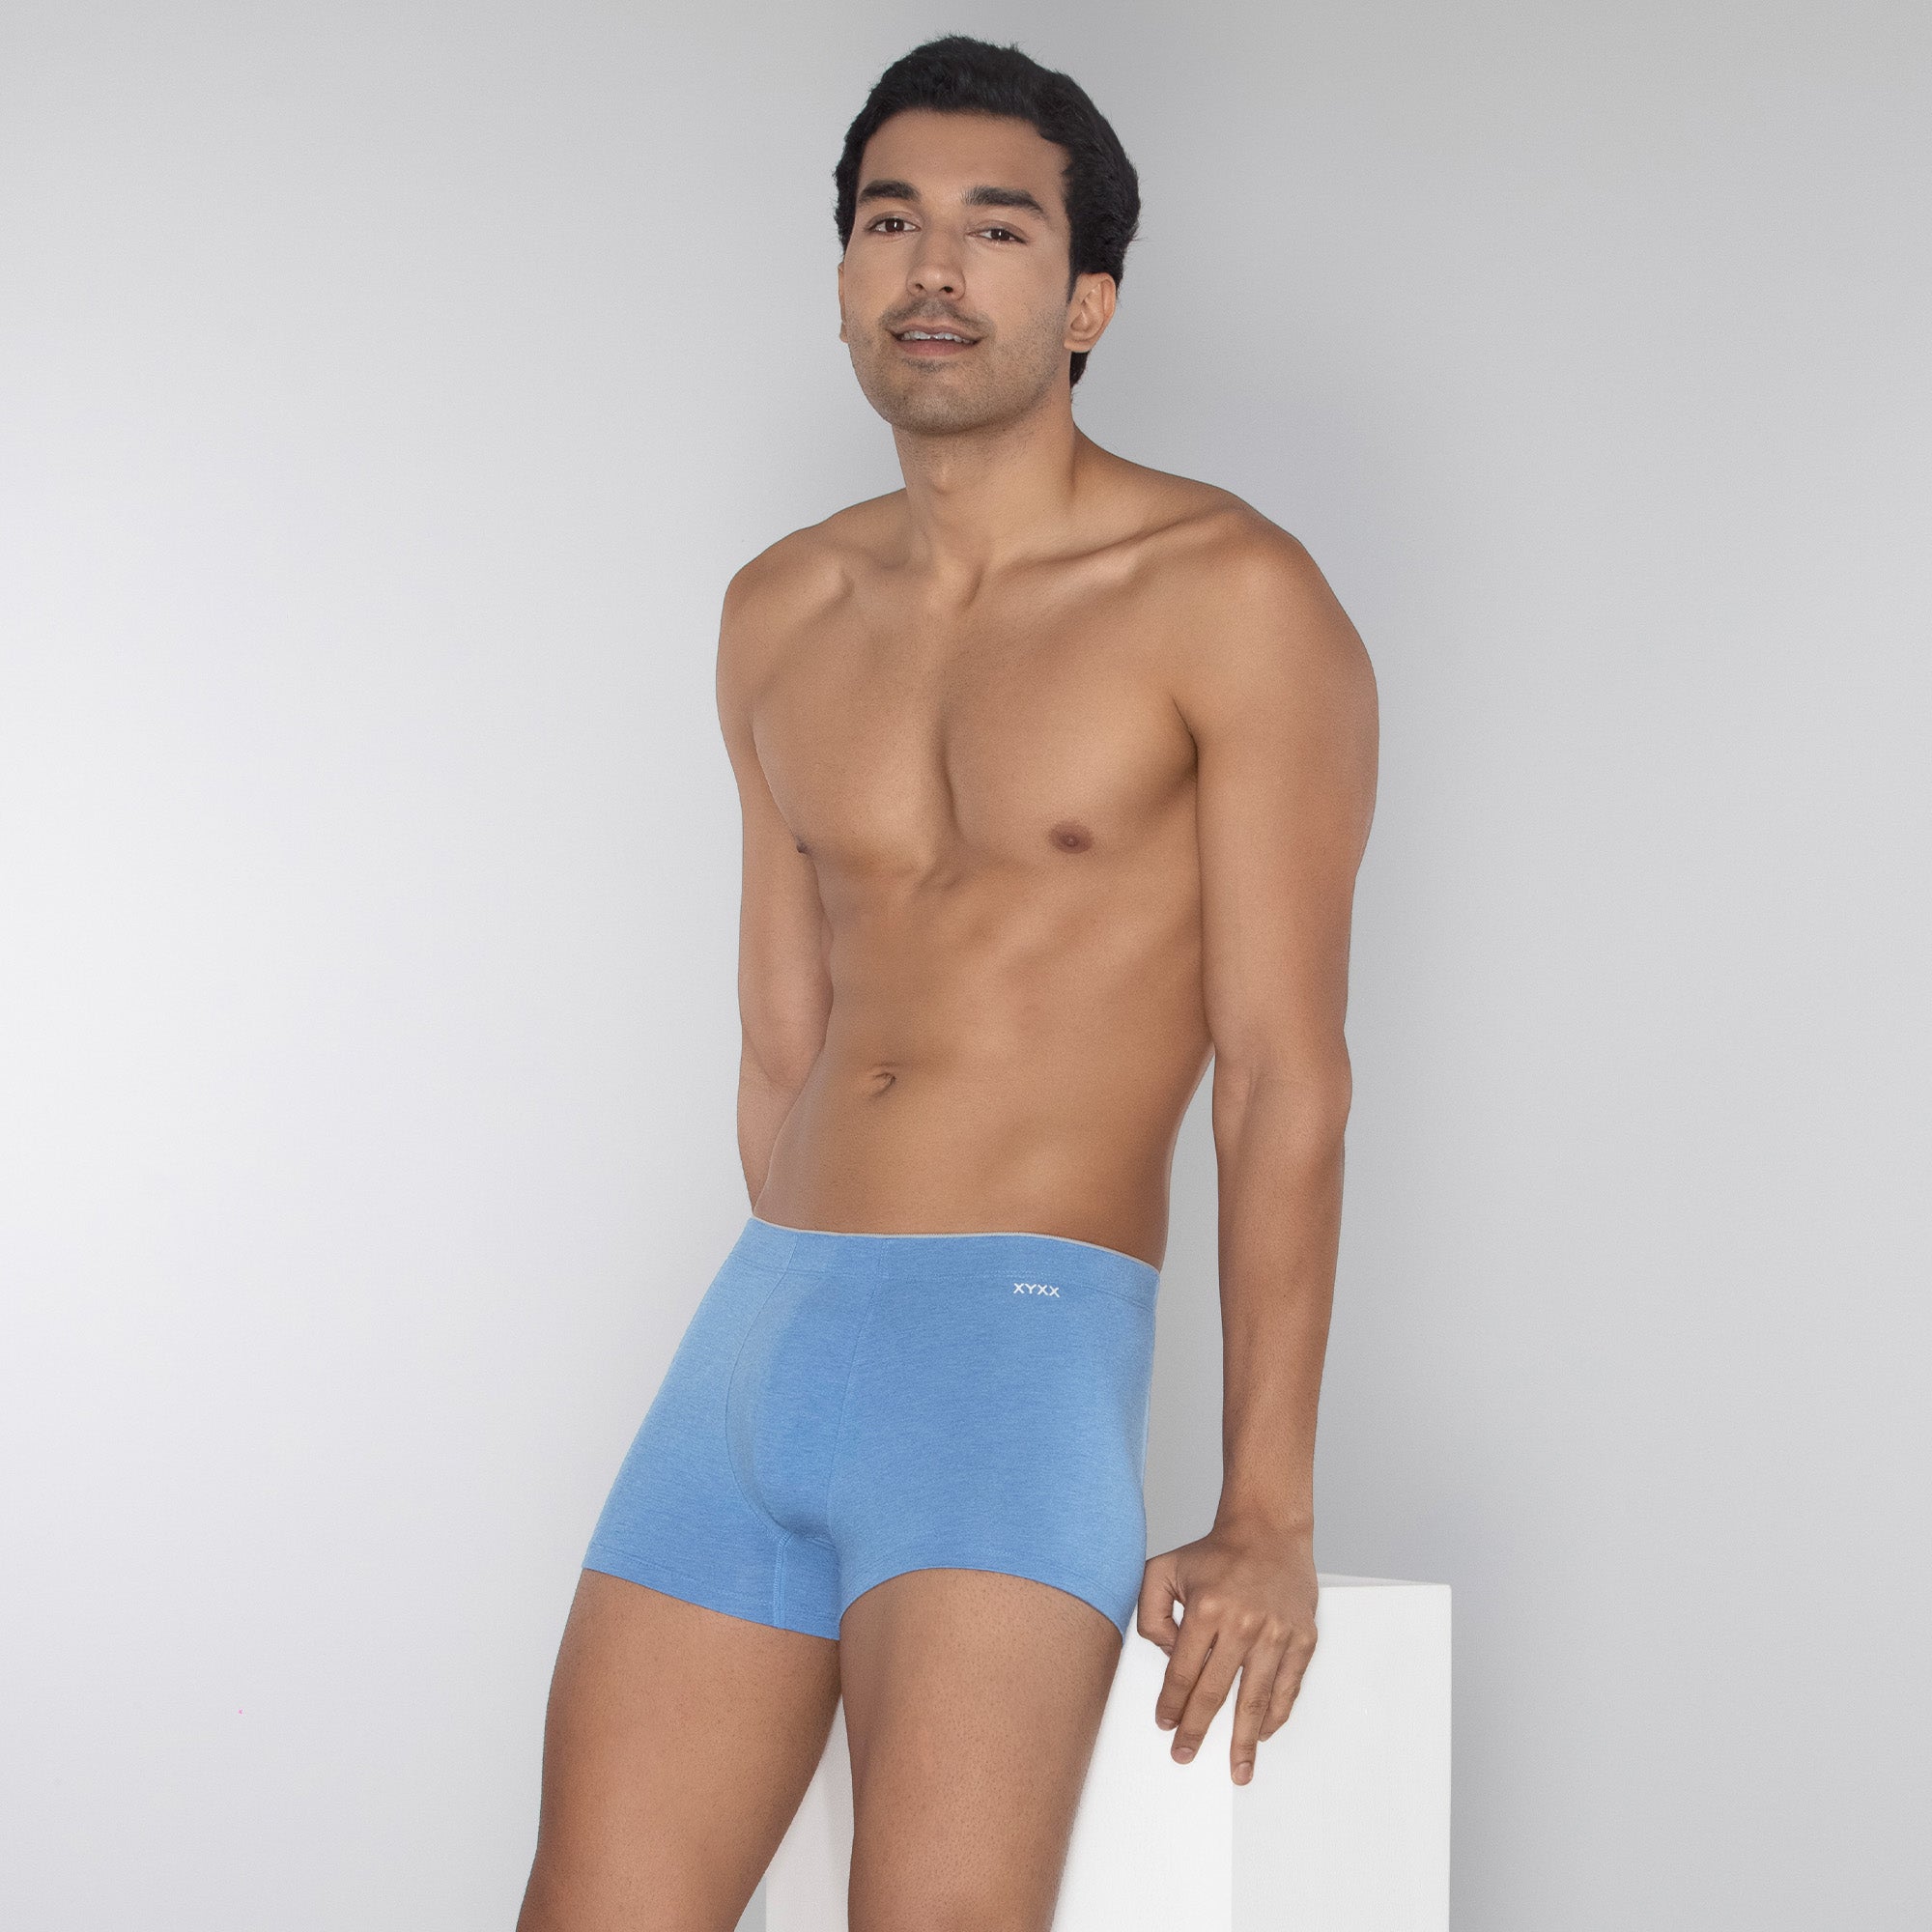 Uno Medley Modal Trunks For Men Icy Blue -  XYXX Mens Apparels